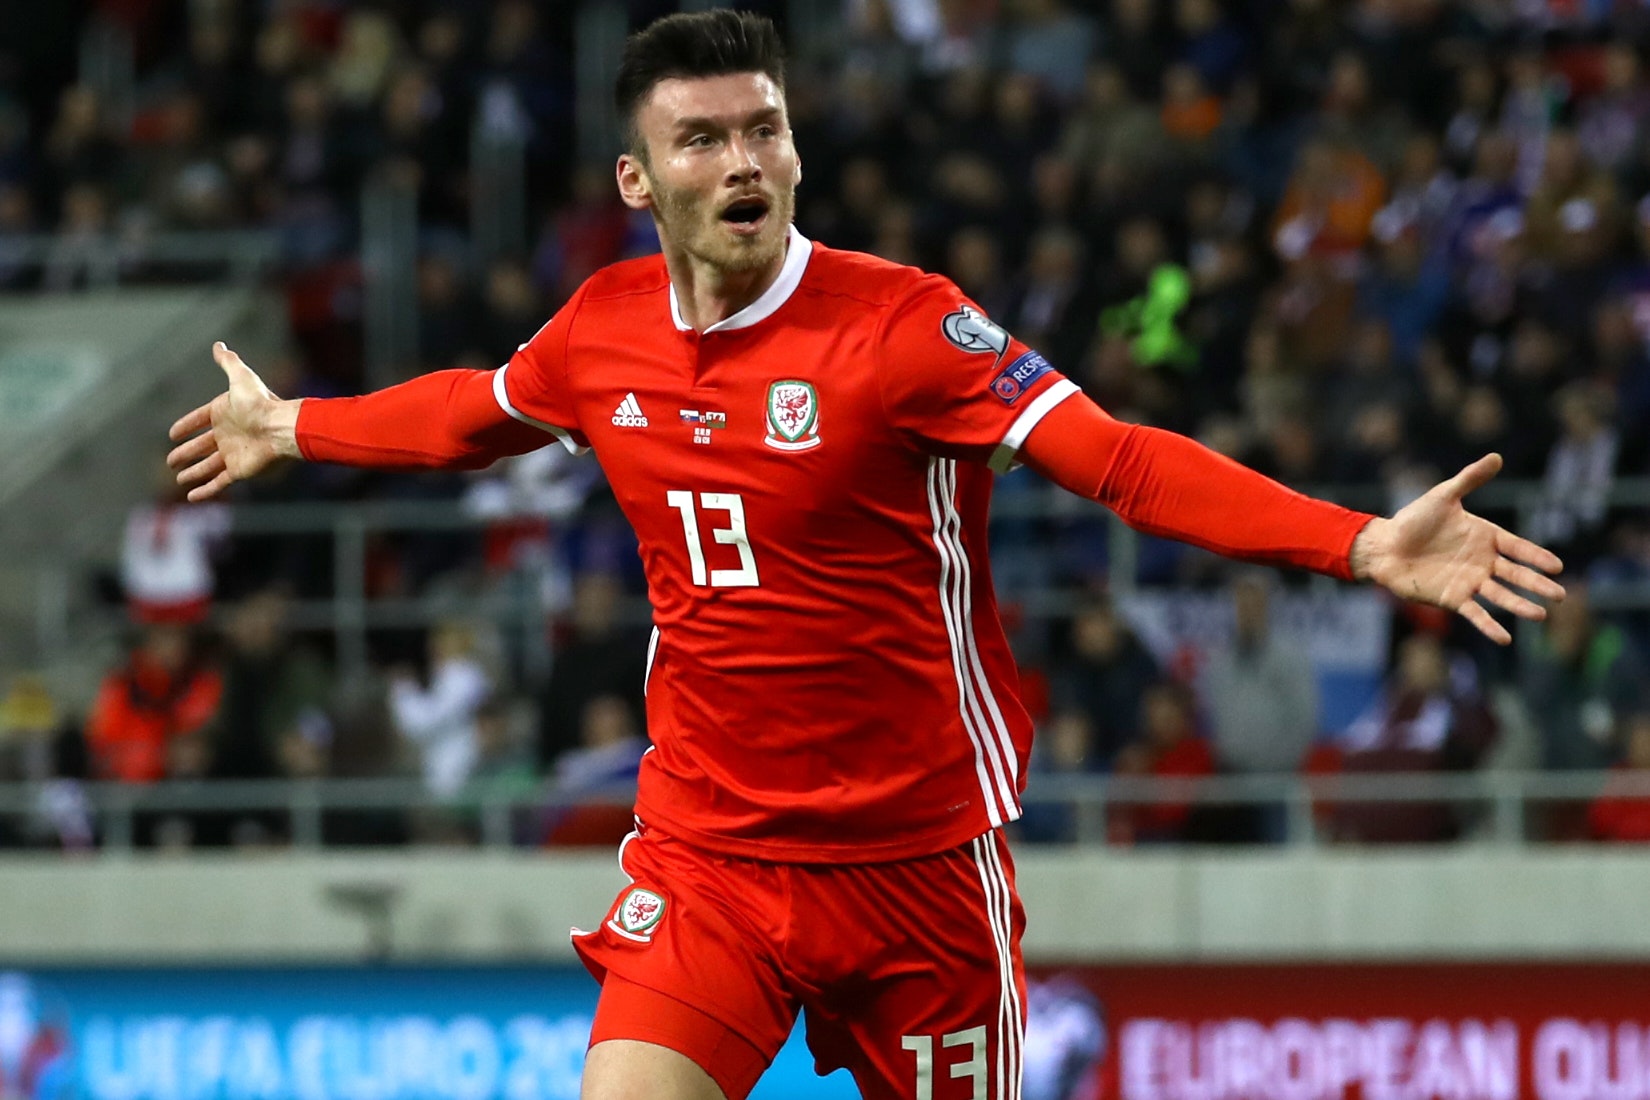 Kieffer Moore set to join Cardiff rather than Middlesbrough